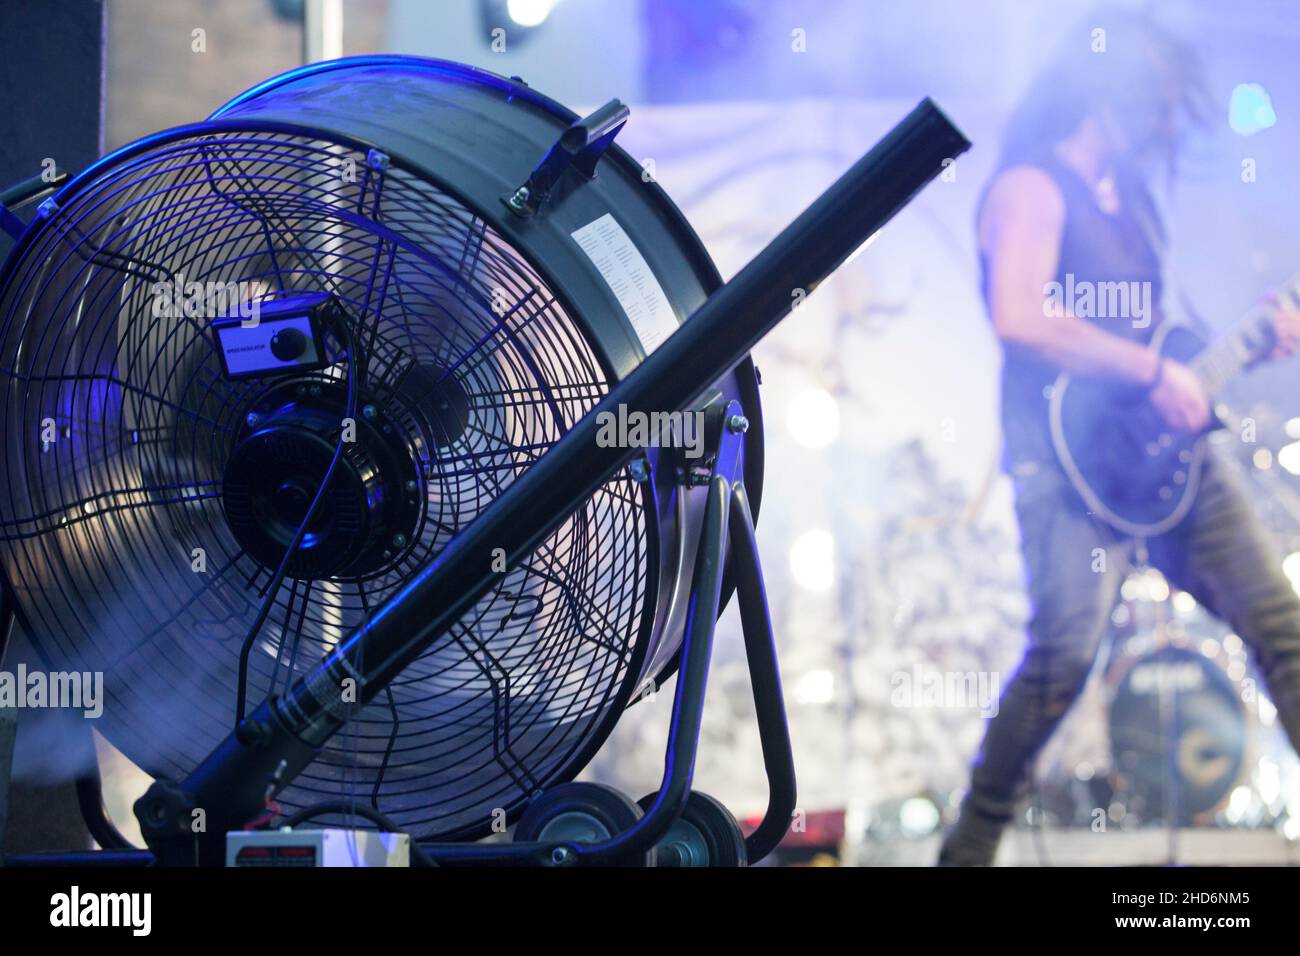 Stage blower used with haze machine during live rock performance. Musicians on background. Stock Photo